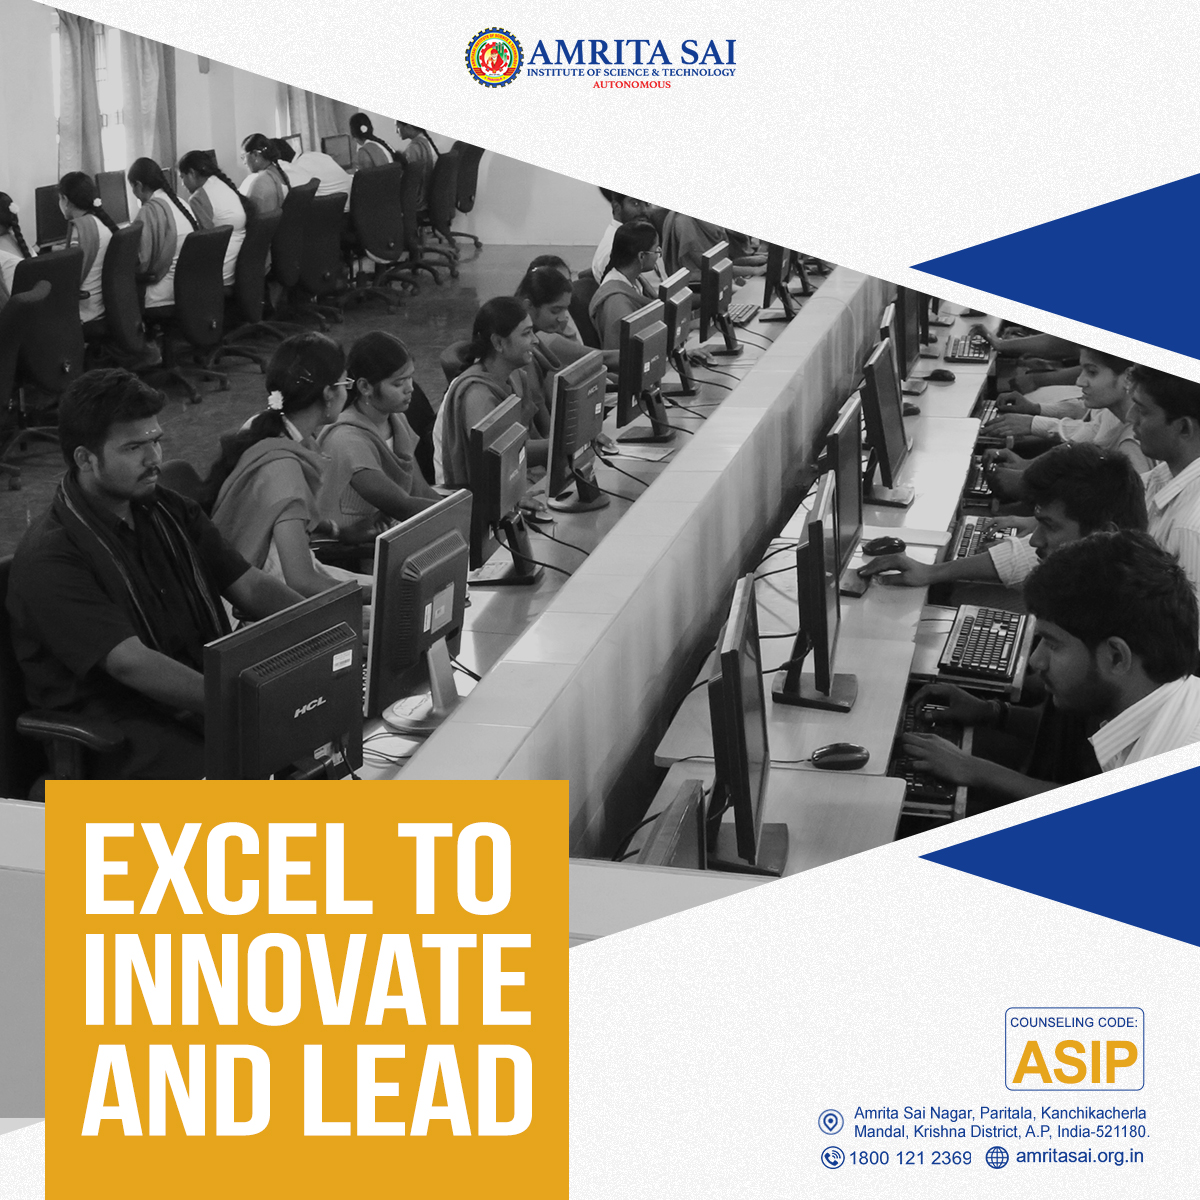 The advanced technological courses offered at Amrita Sai can help you to combine the best learning strategies and practicality, paving the way for future innovations that drive this fast-paced world.
Location: bit.ly/30EnCQR
#engineering #technicalcourses